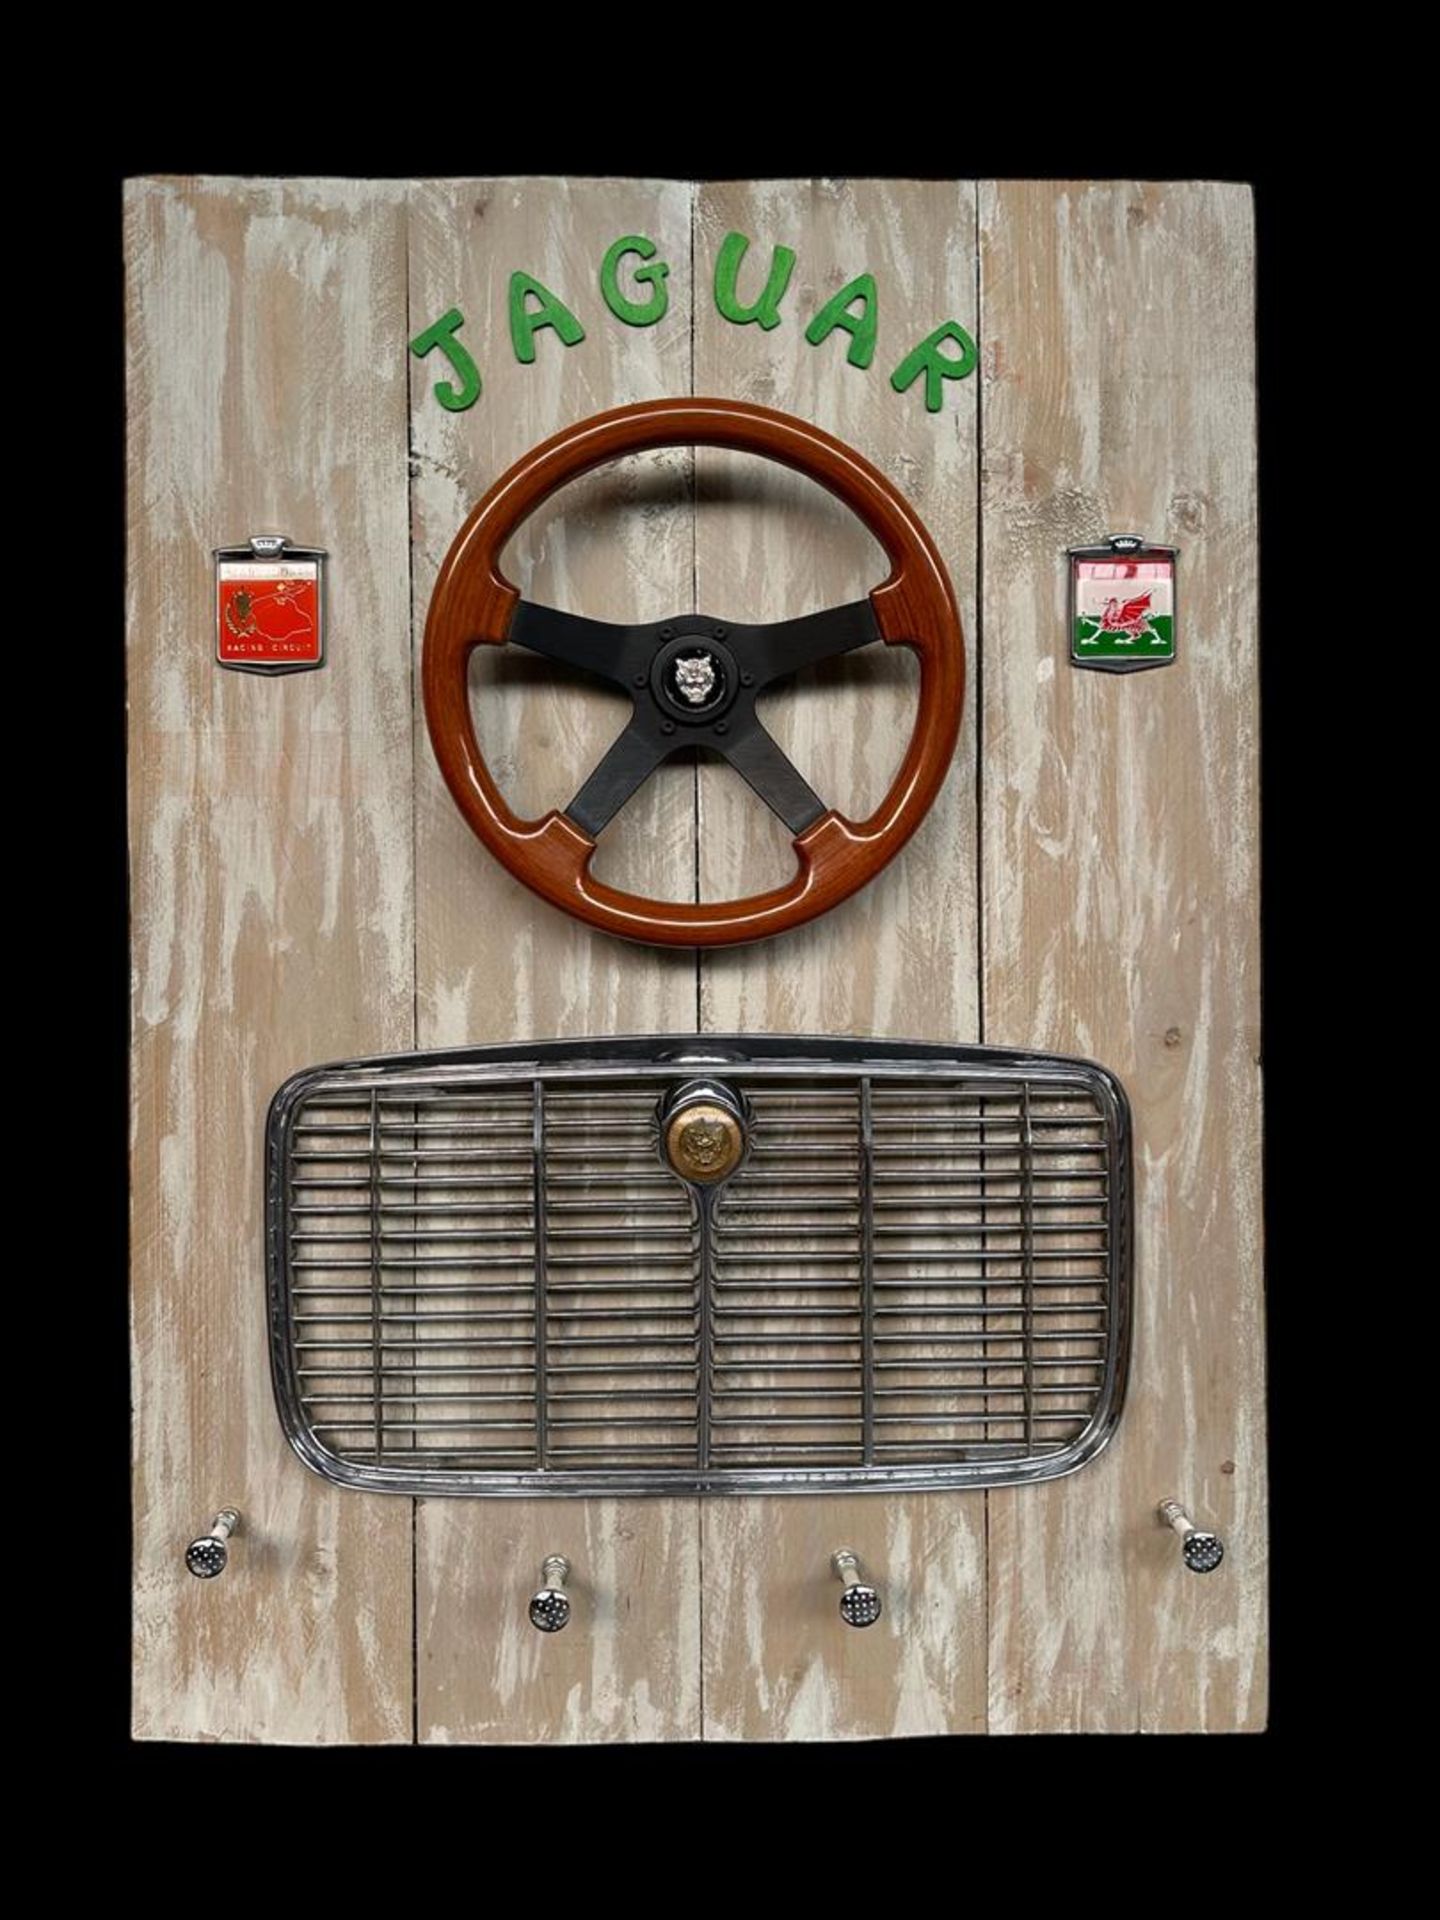 A coat rack made from Jaguar parts including steering wheel and grille, along with two emblems inclu